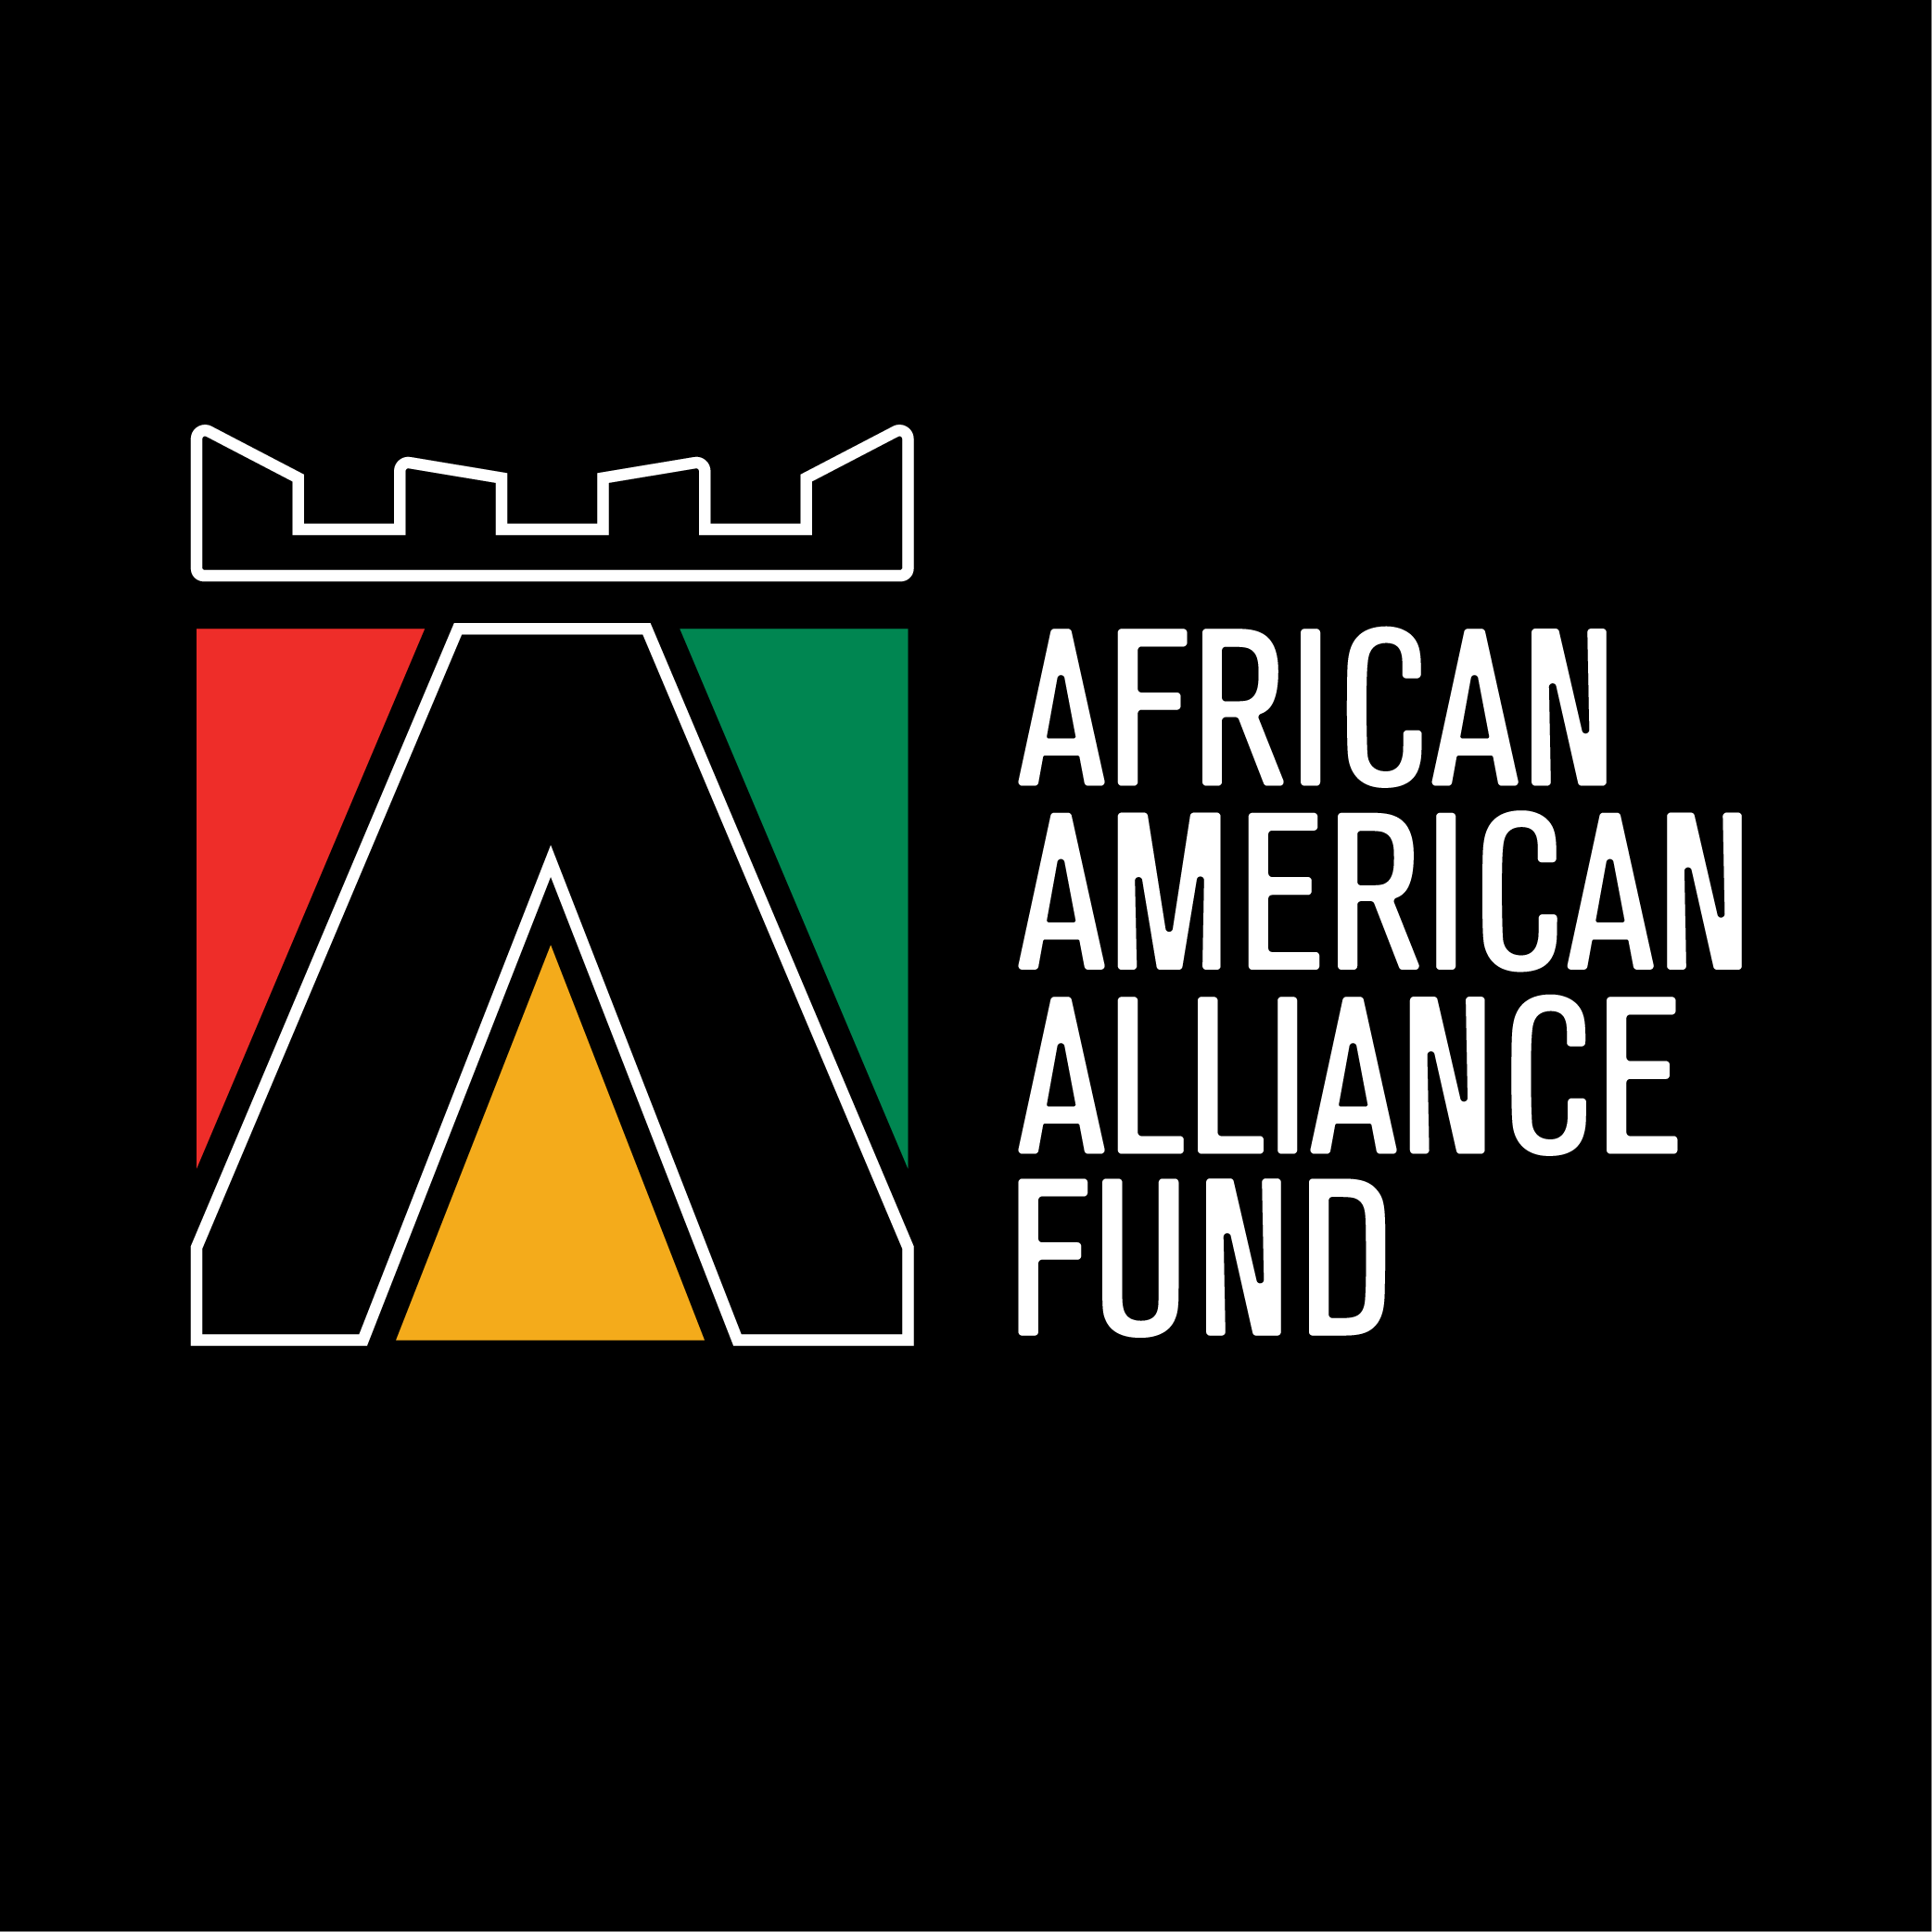 Orange County Community Foundation Announces $163,500 in Grants from the African American Alliance Fund